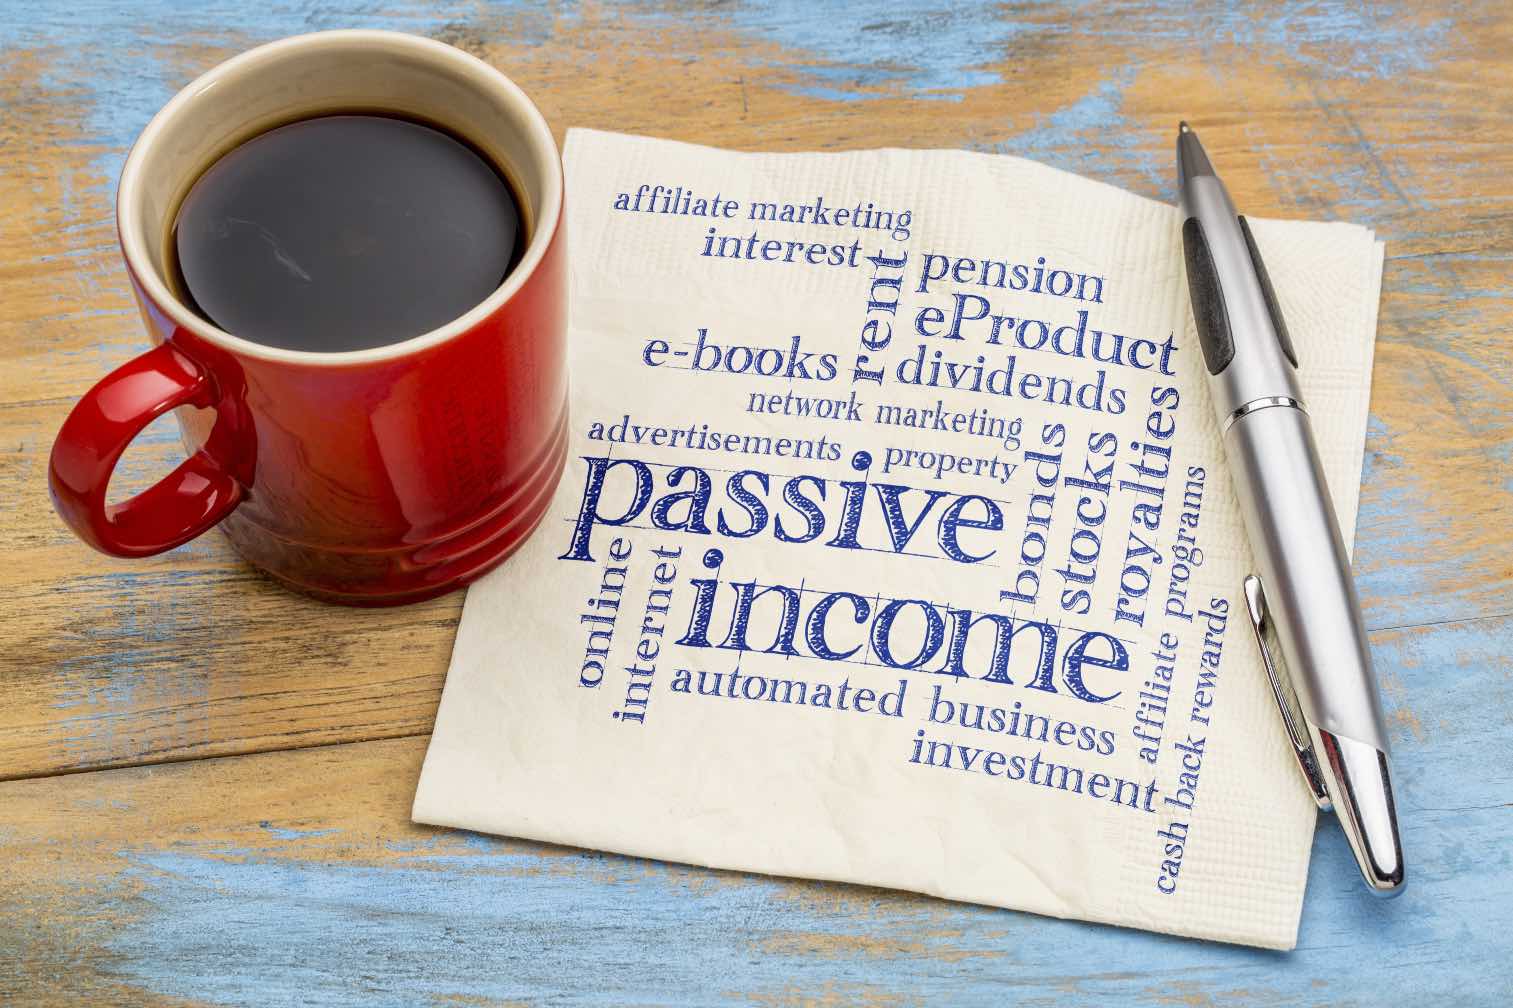 14 Ways to Create Passive, Recurring Income